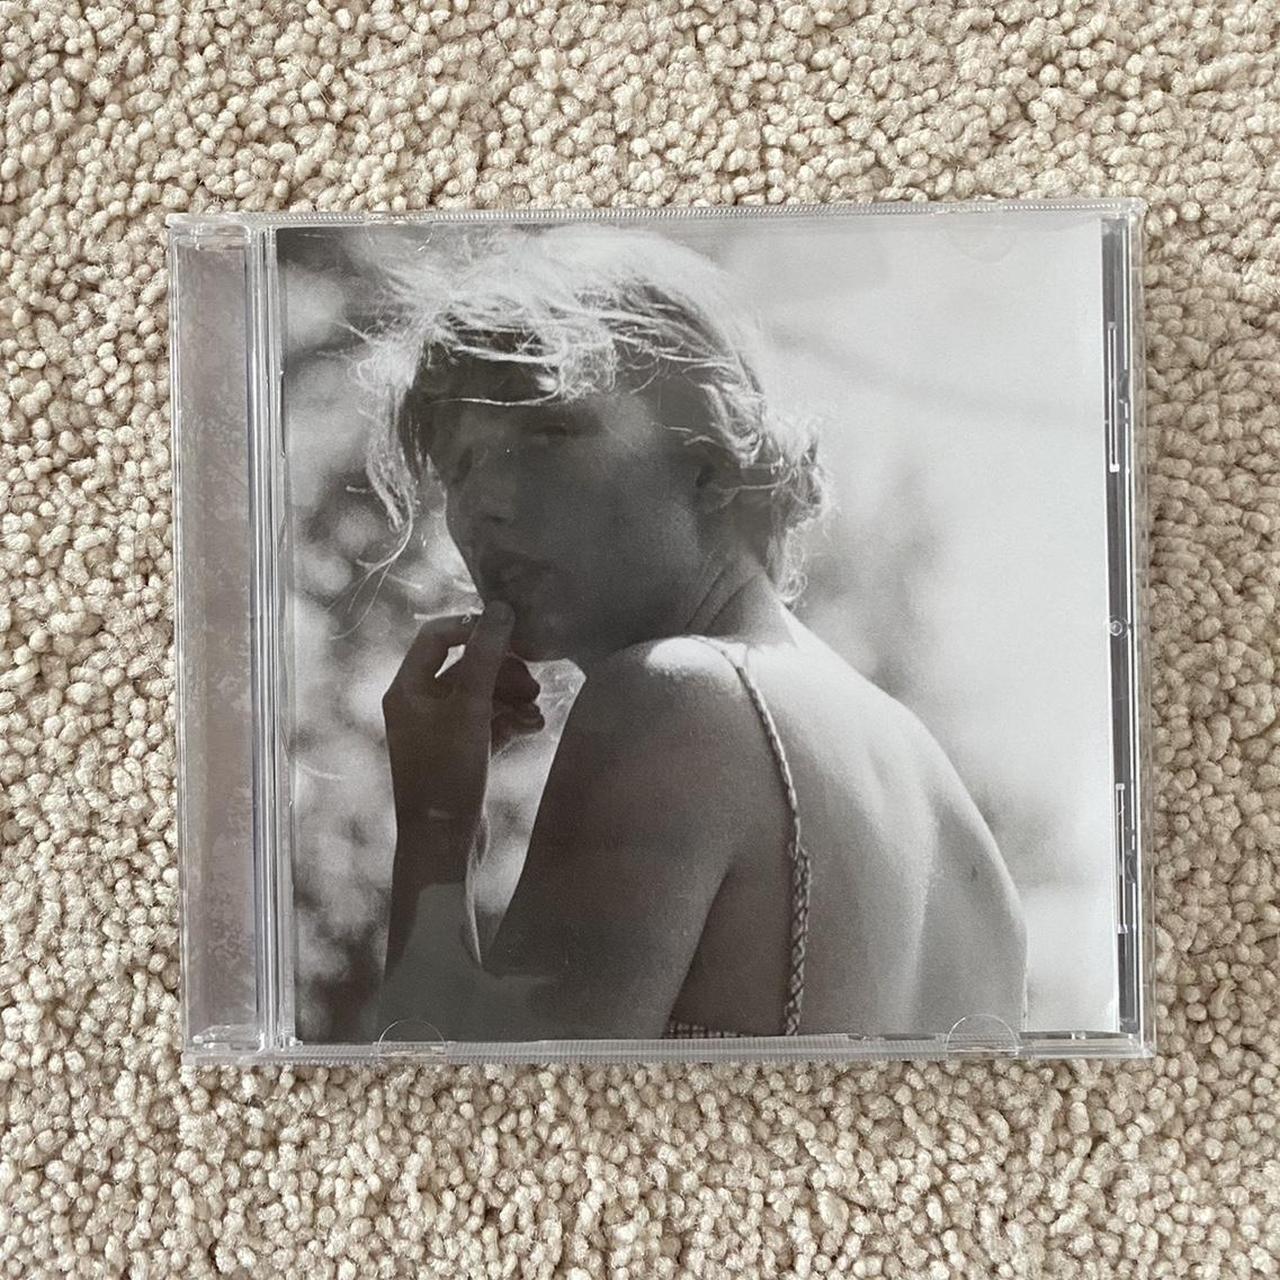 Taylor Swift - folklore CD. In great condition, only - Depop